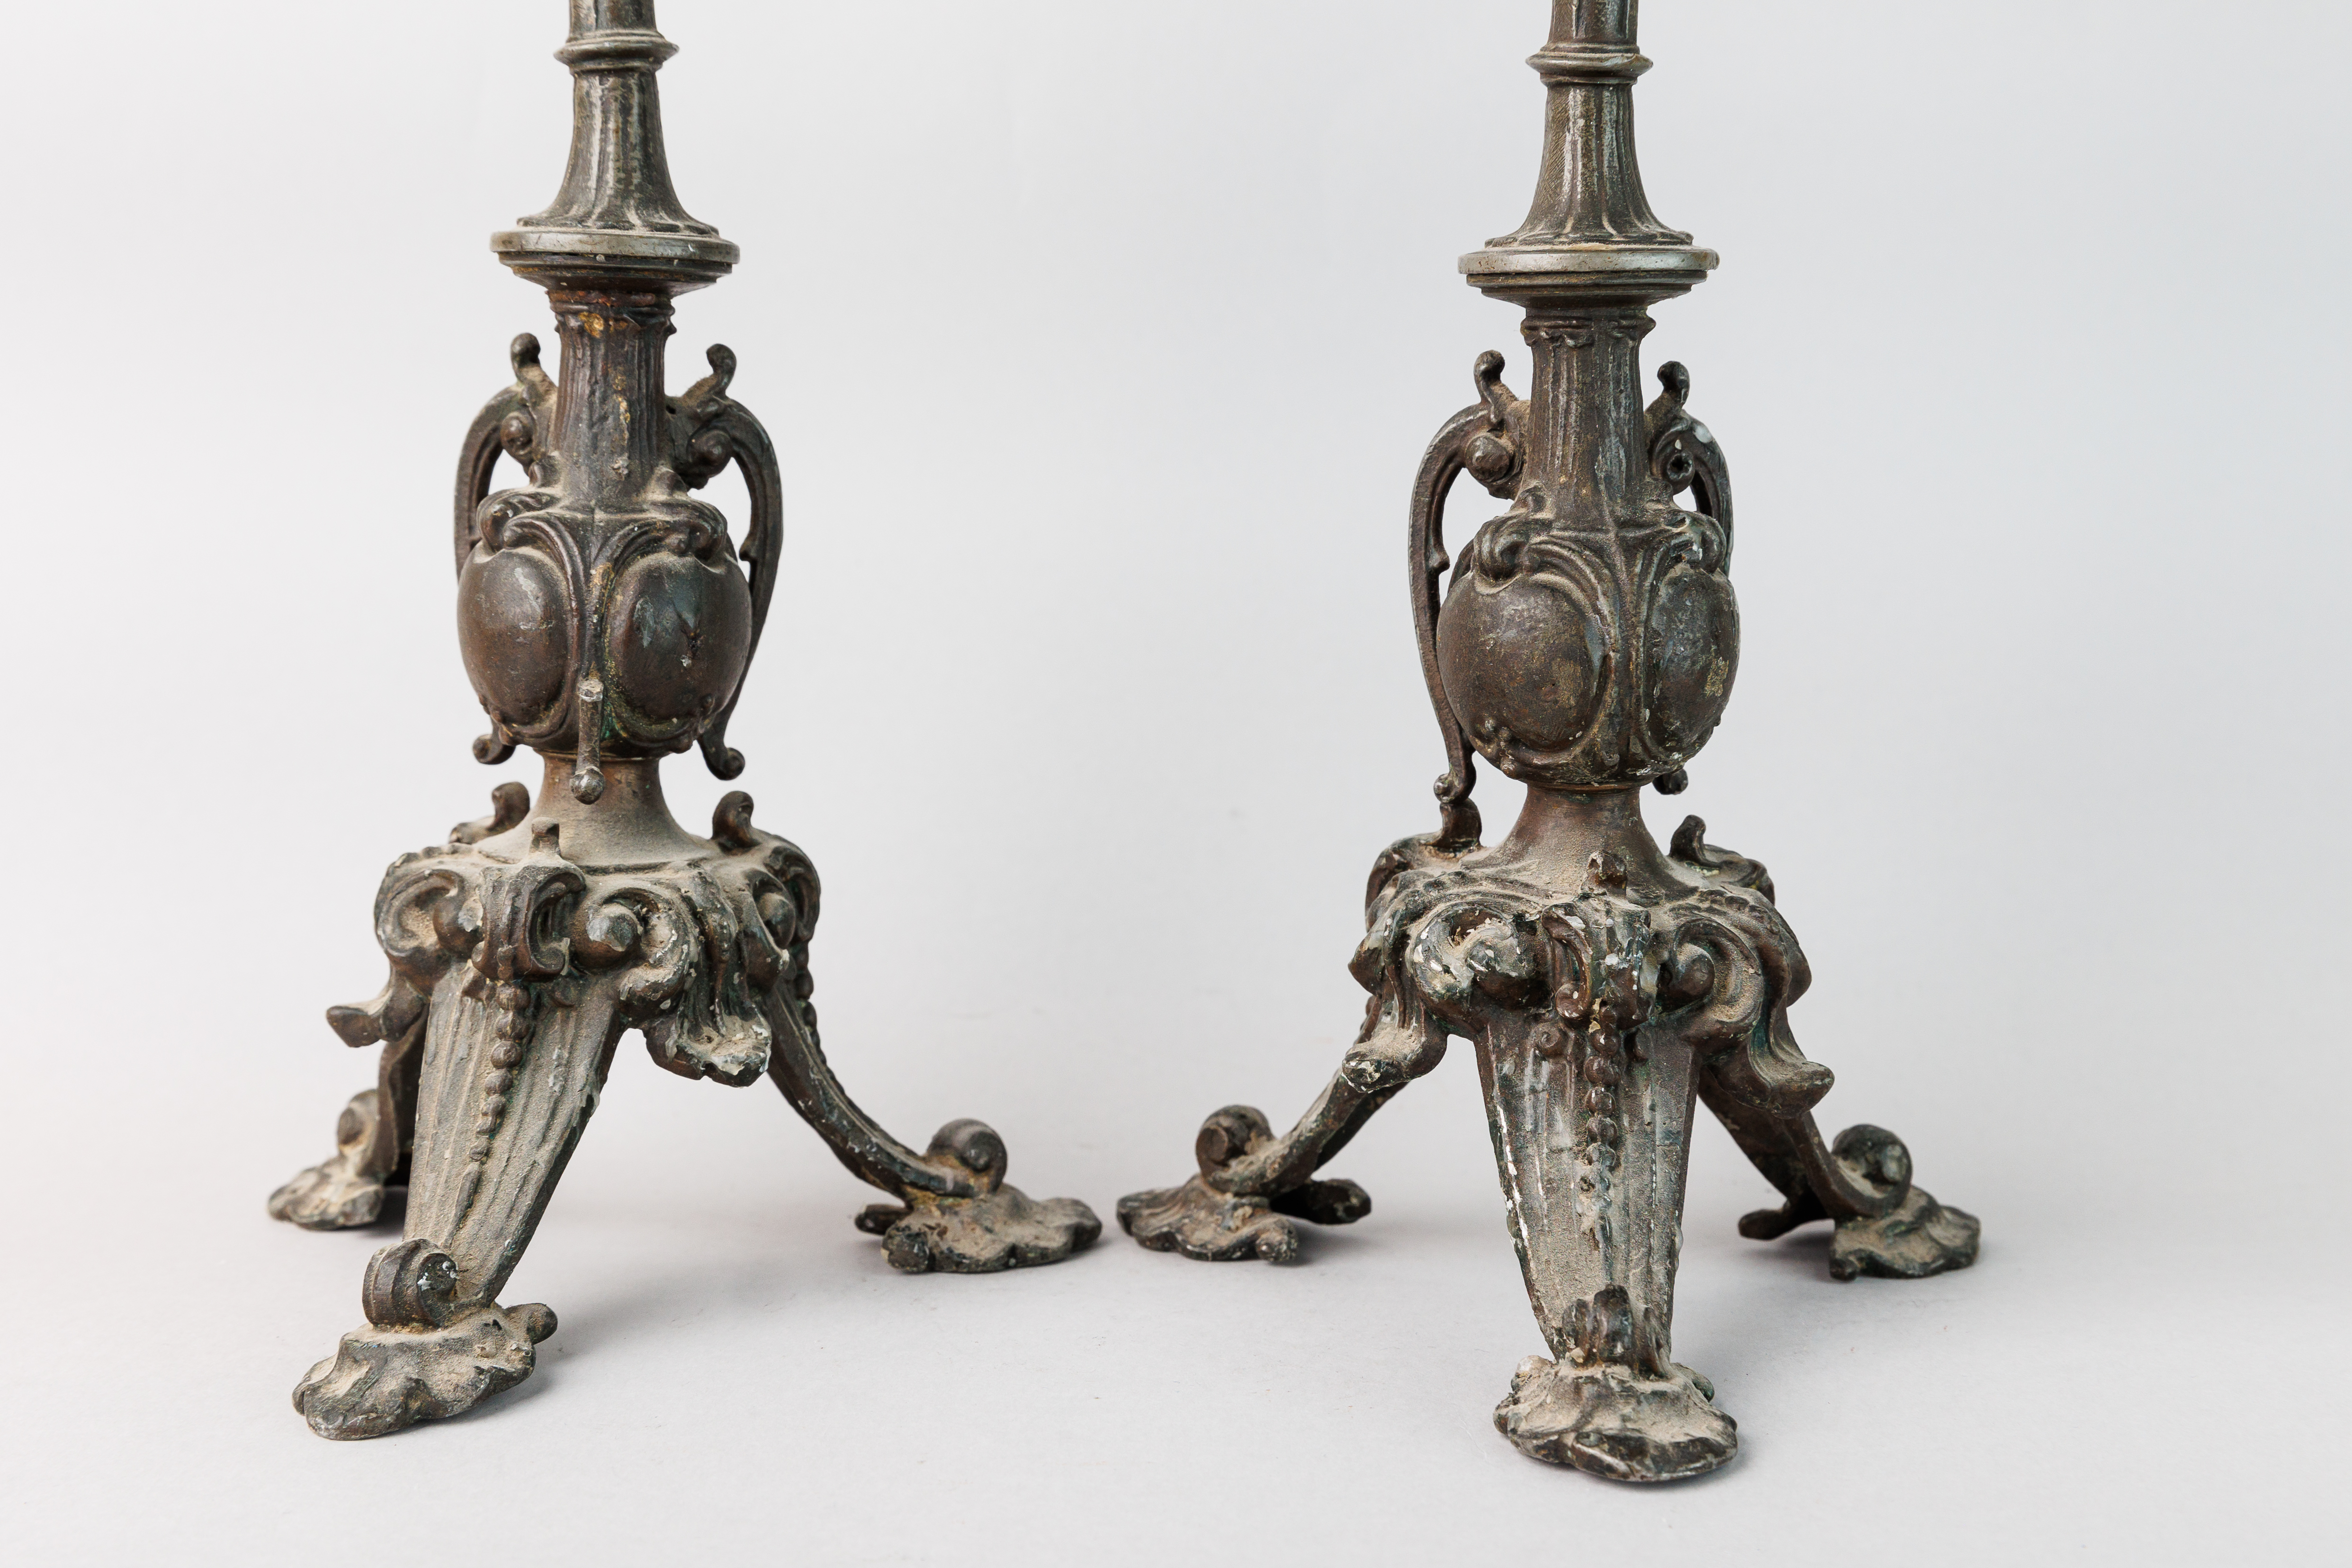 Pair of Candelsticks - Image 5 of 9